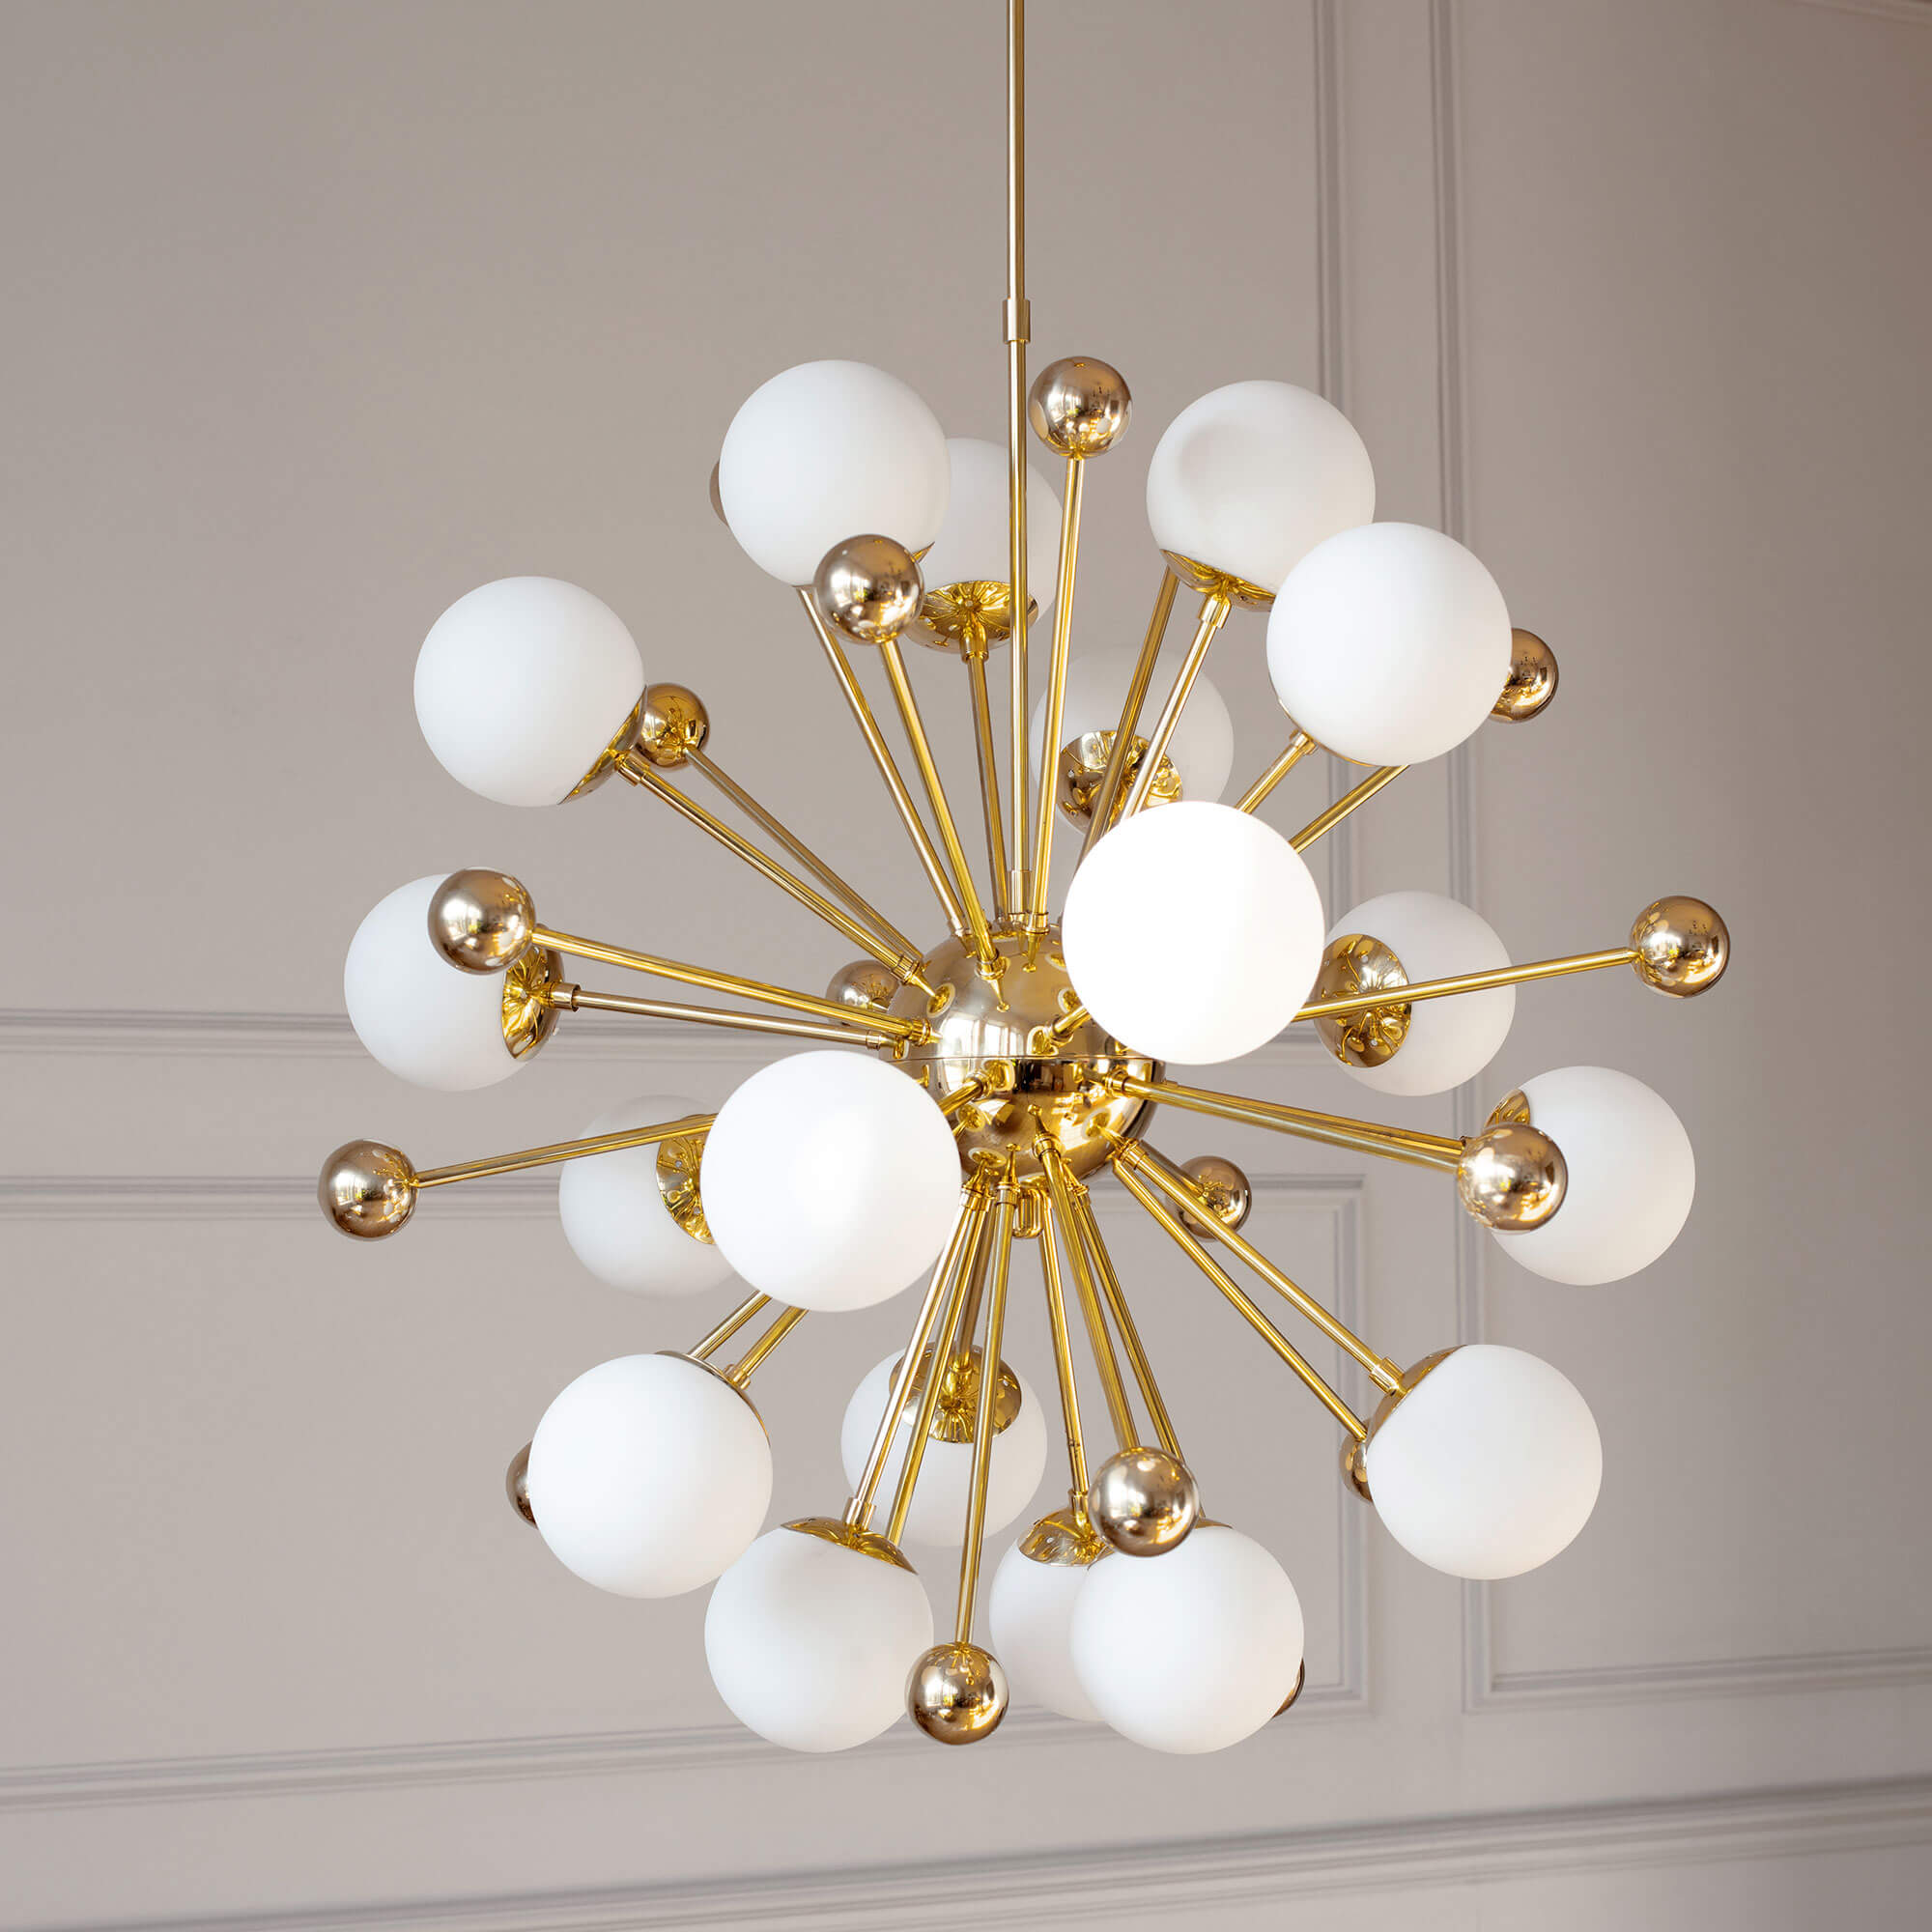 Read more about Graham and green amelia starburst chandelier